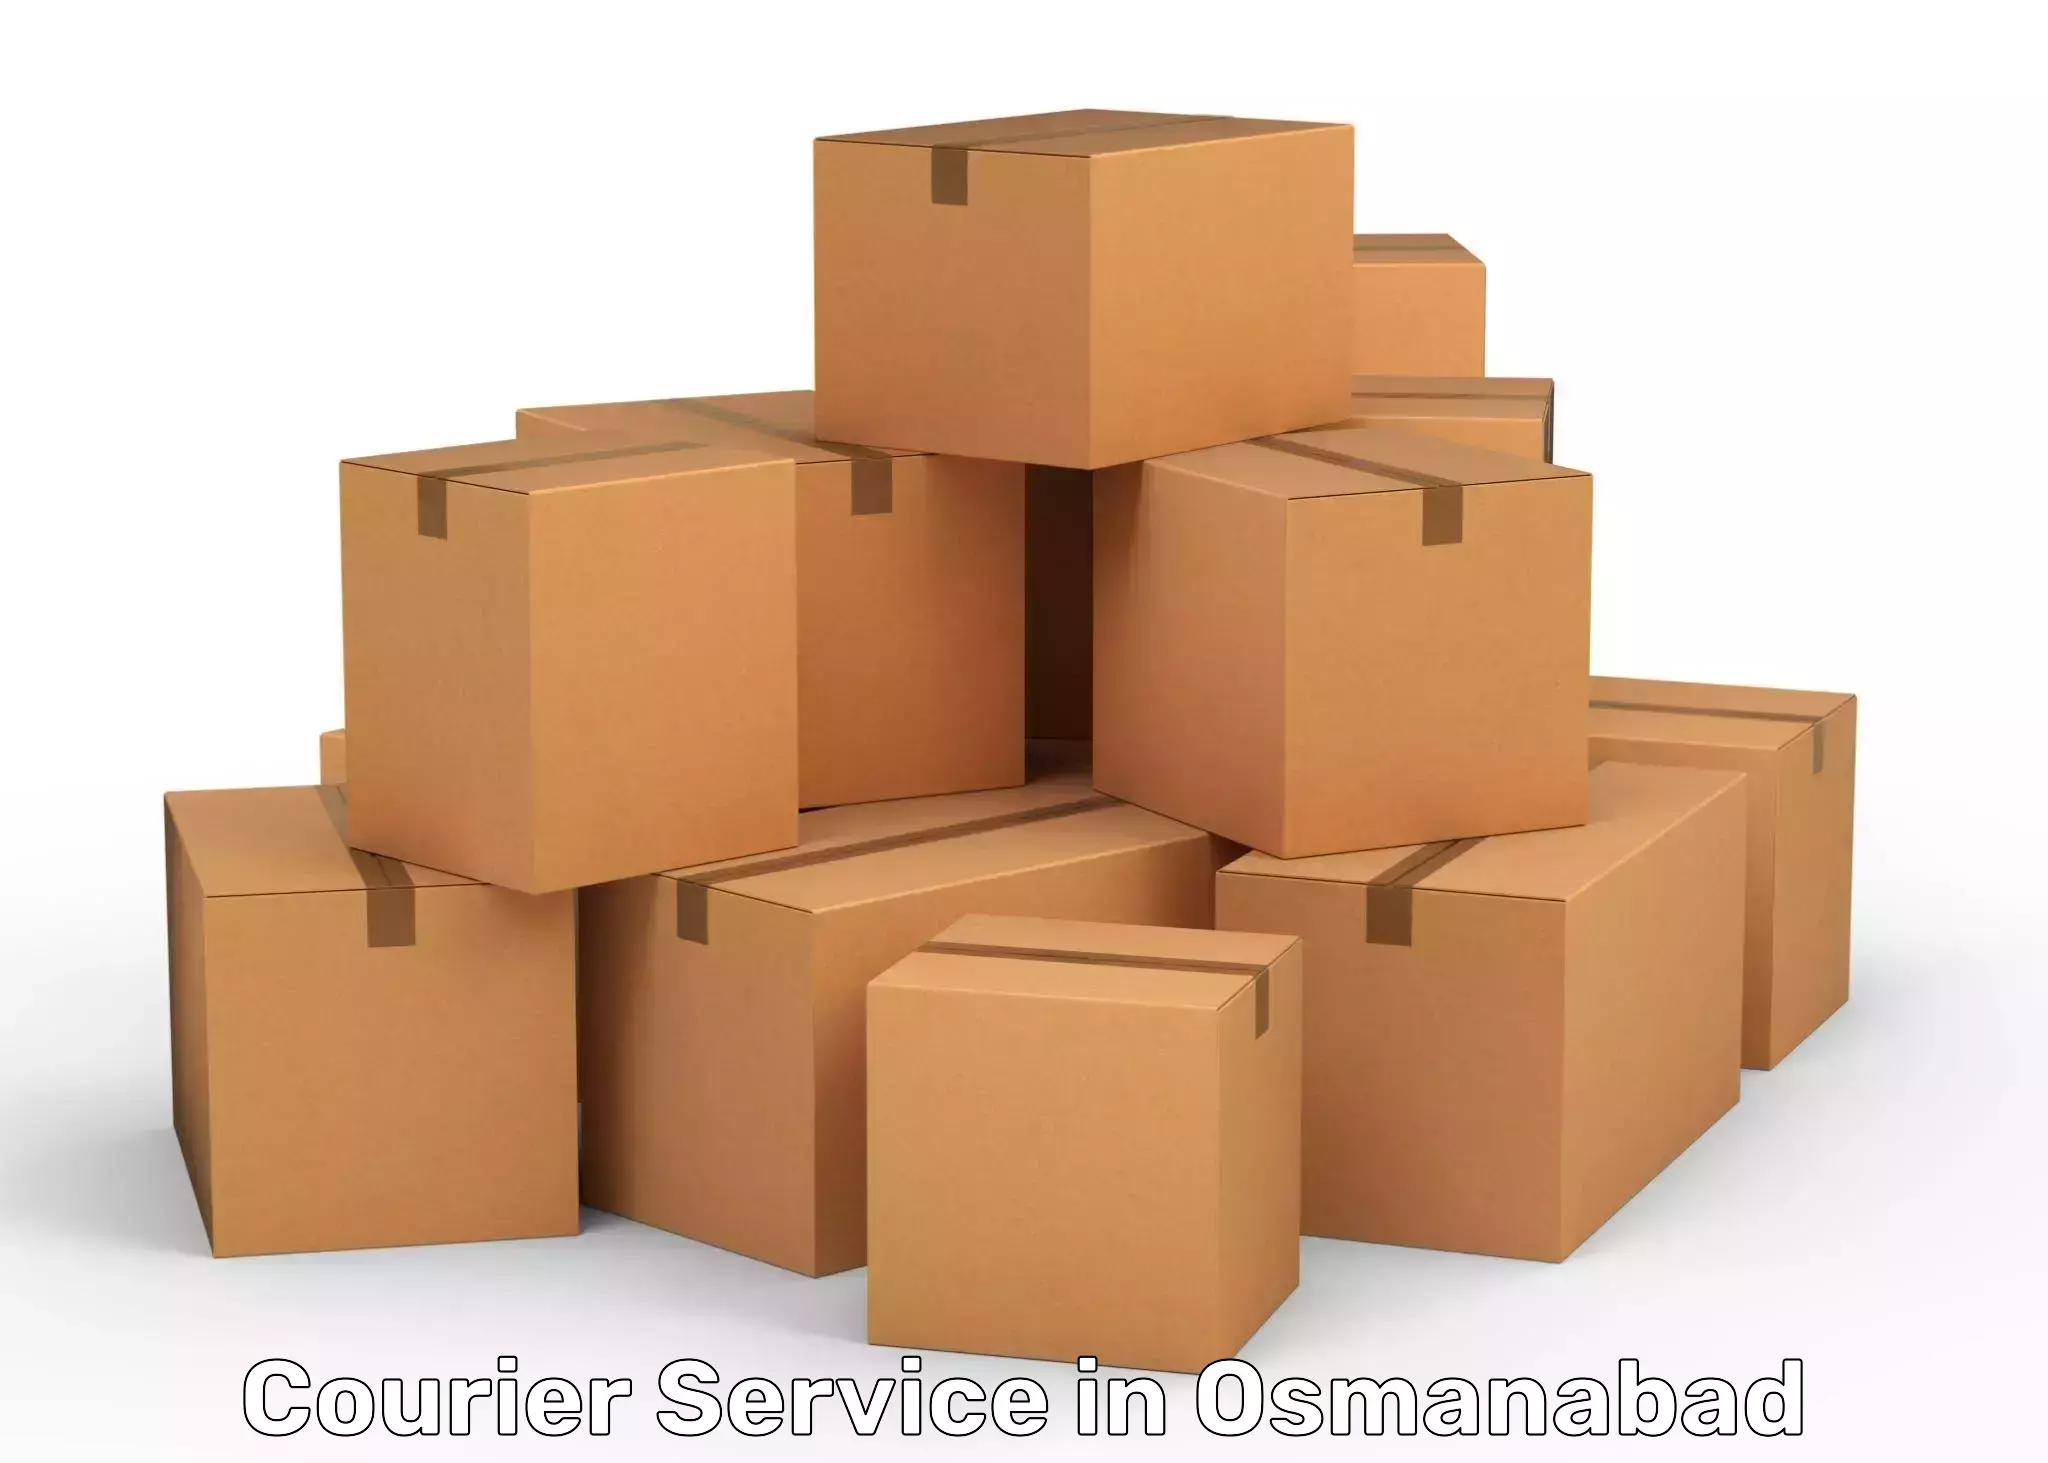 Efficient parcel service in Osmanabad